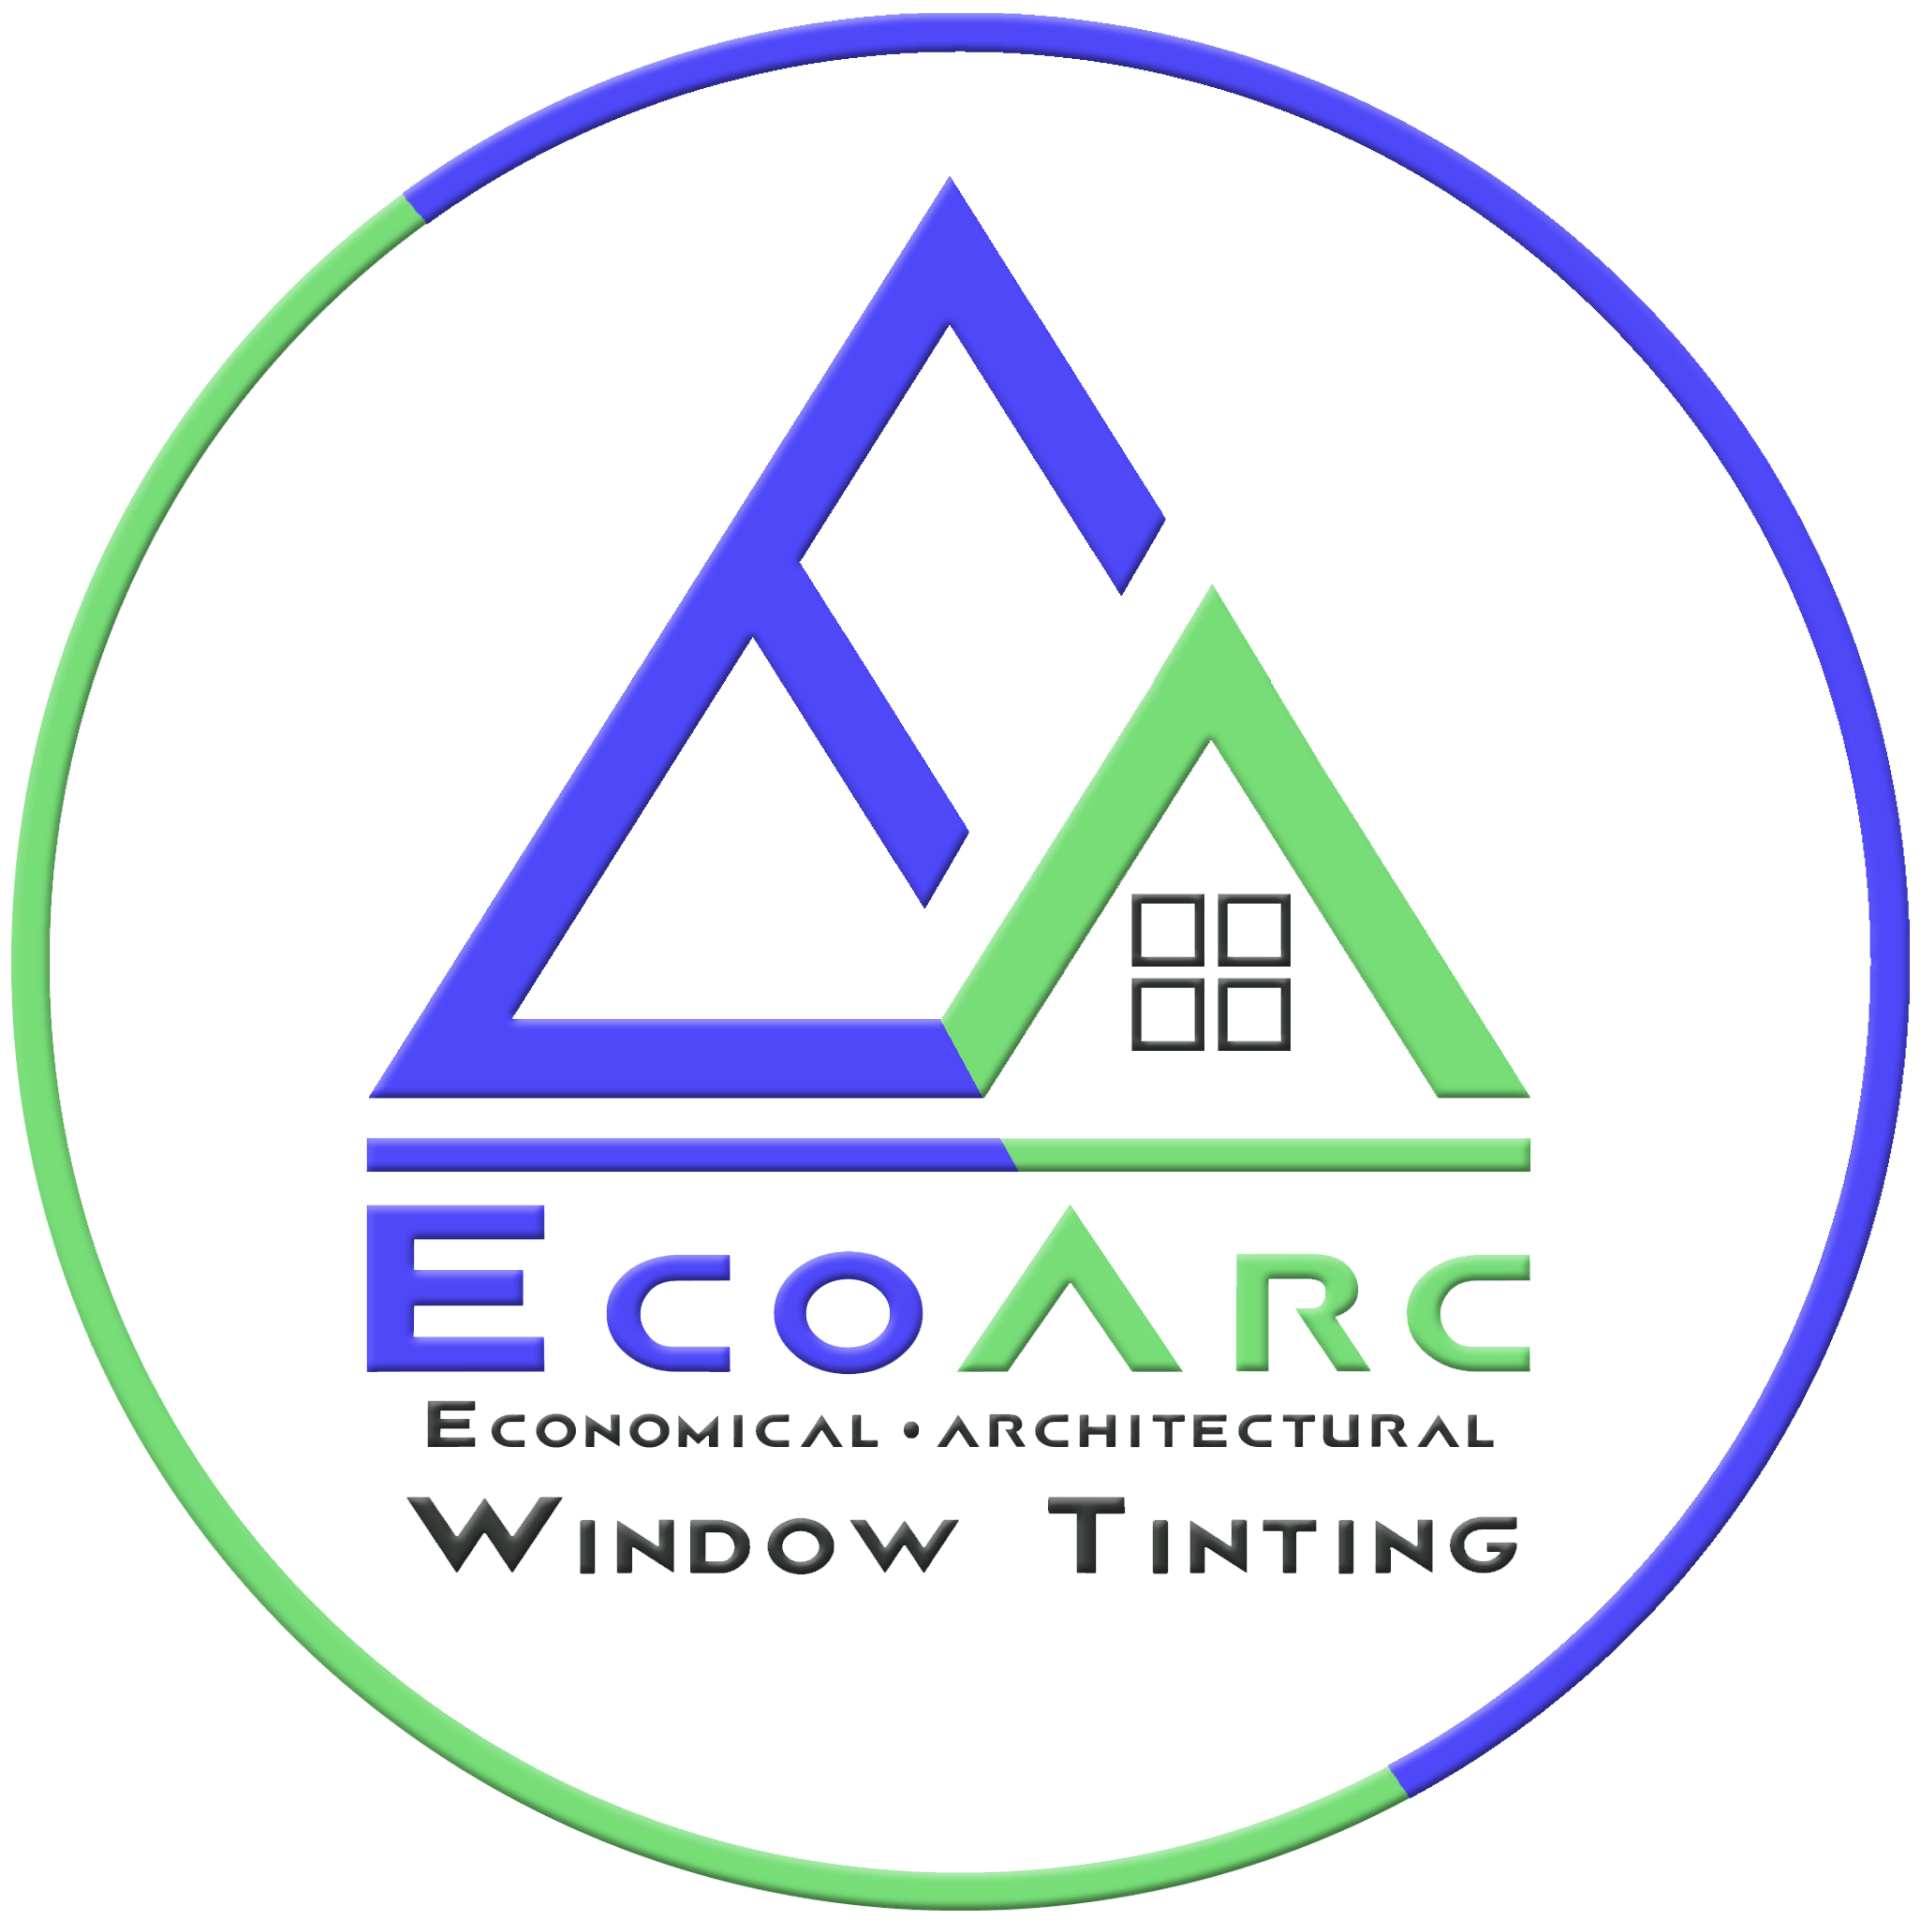 EcoArc Home and Office Window Tinting